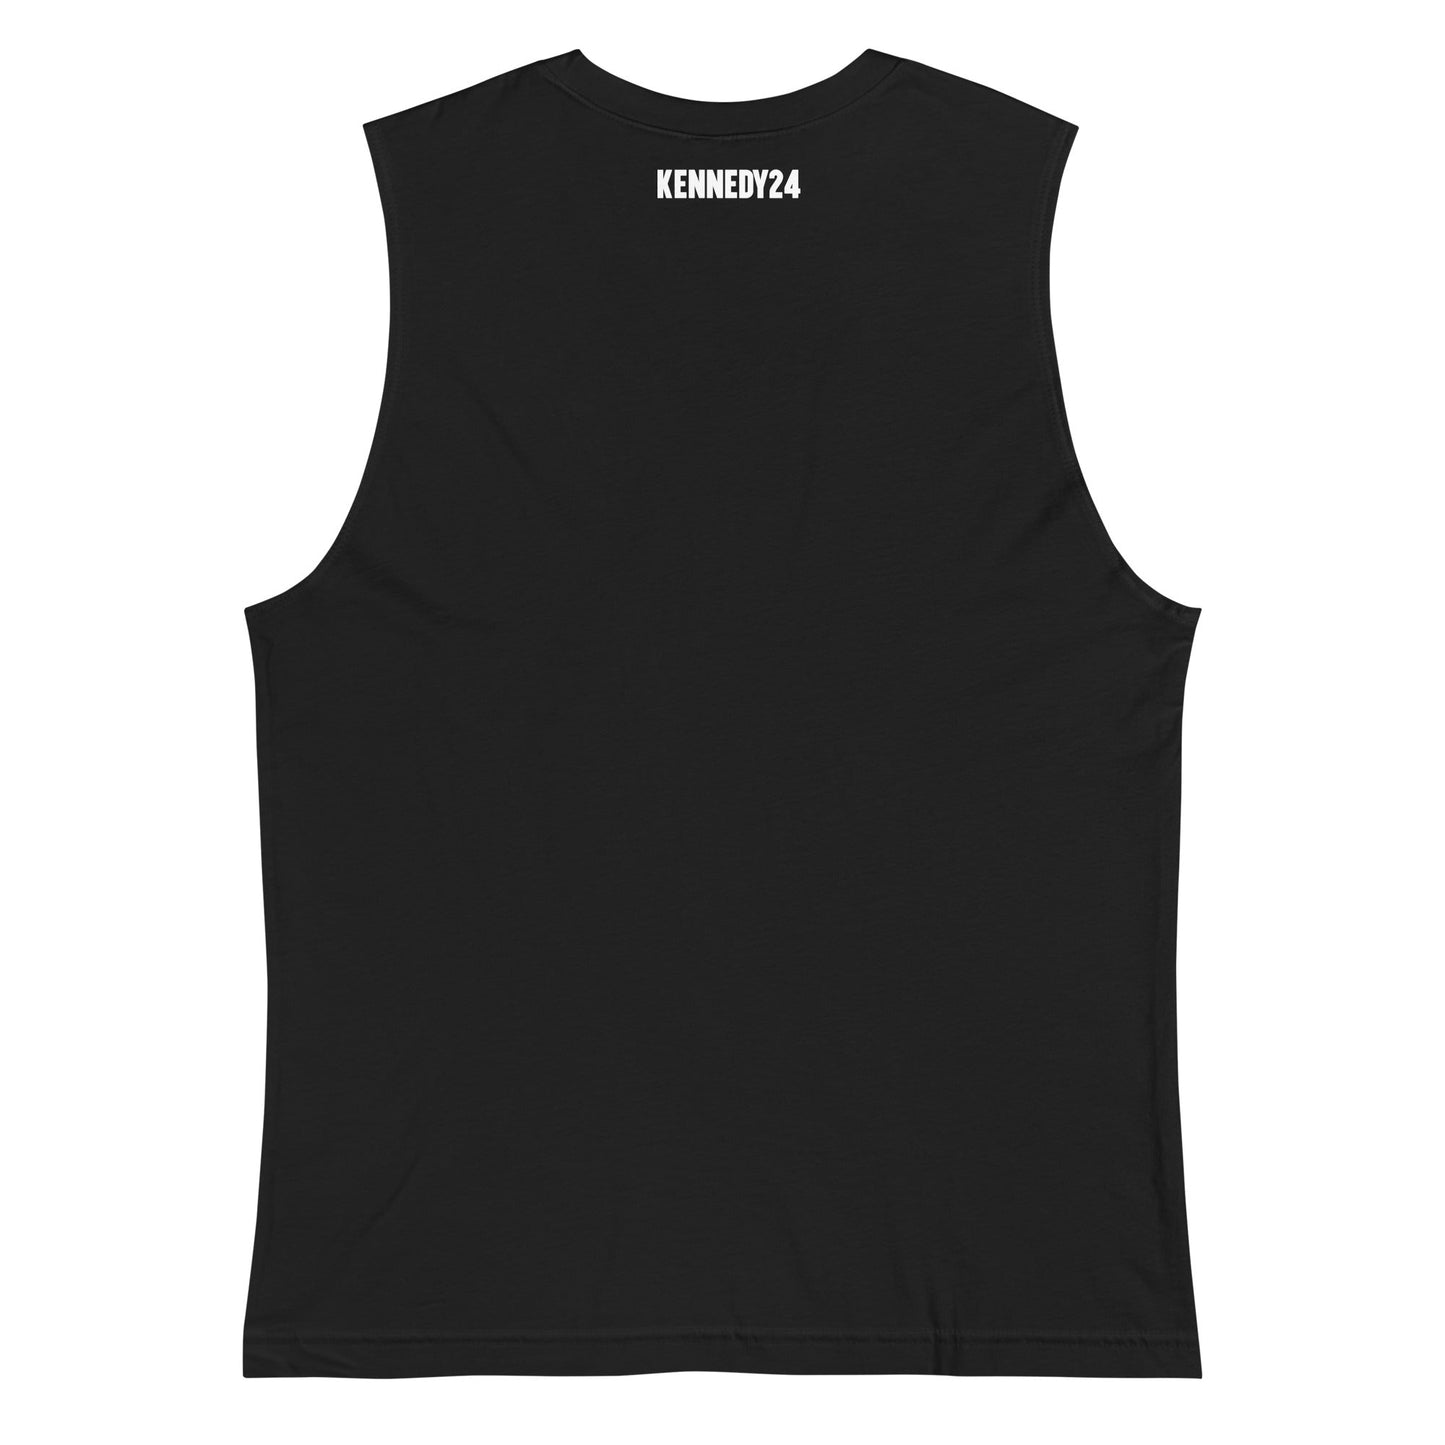 California for Kennedy Bear Muscle Tank Top - TEAM KENNEDY. All rights reserved